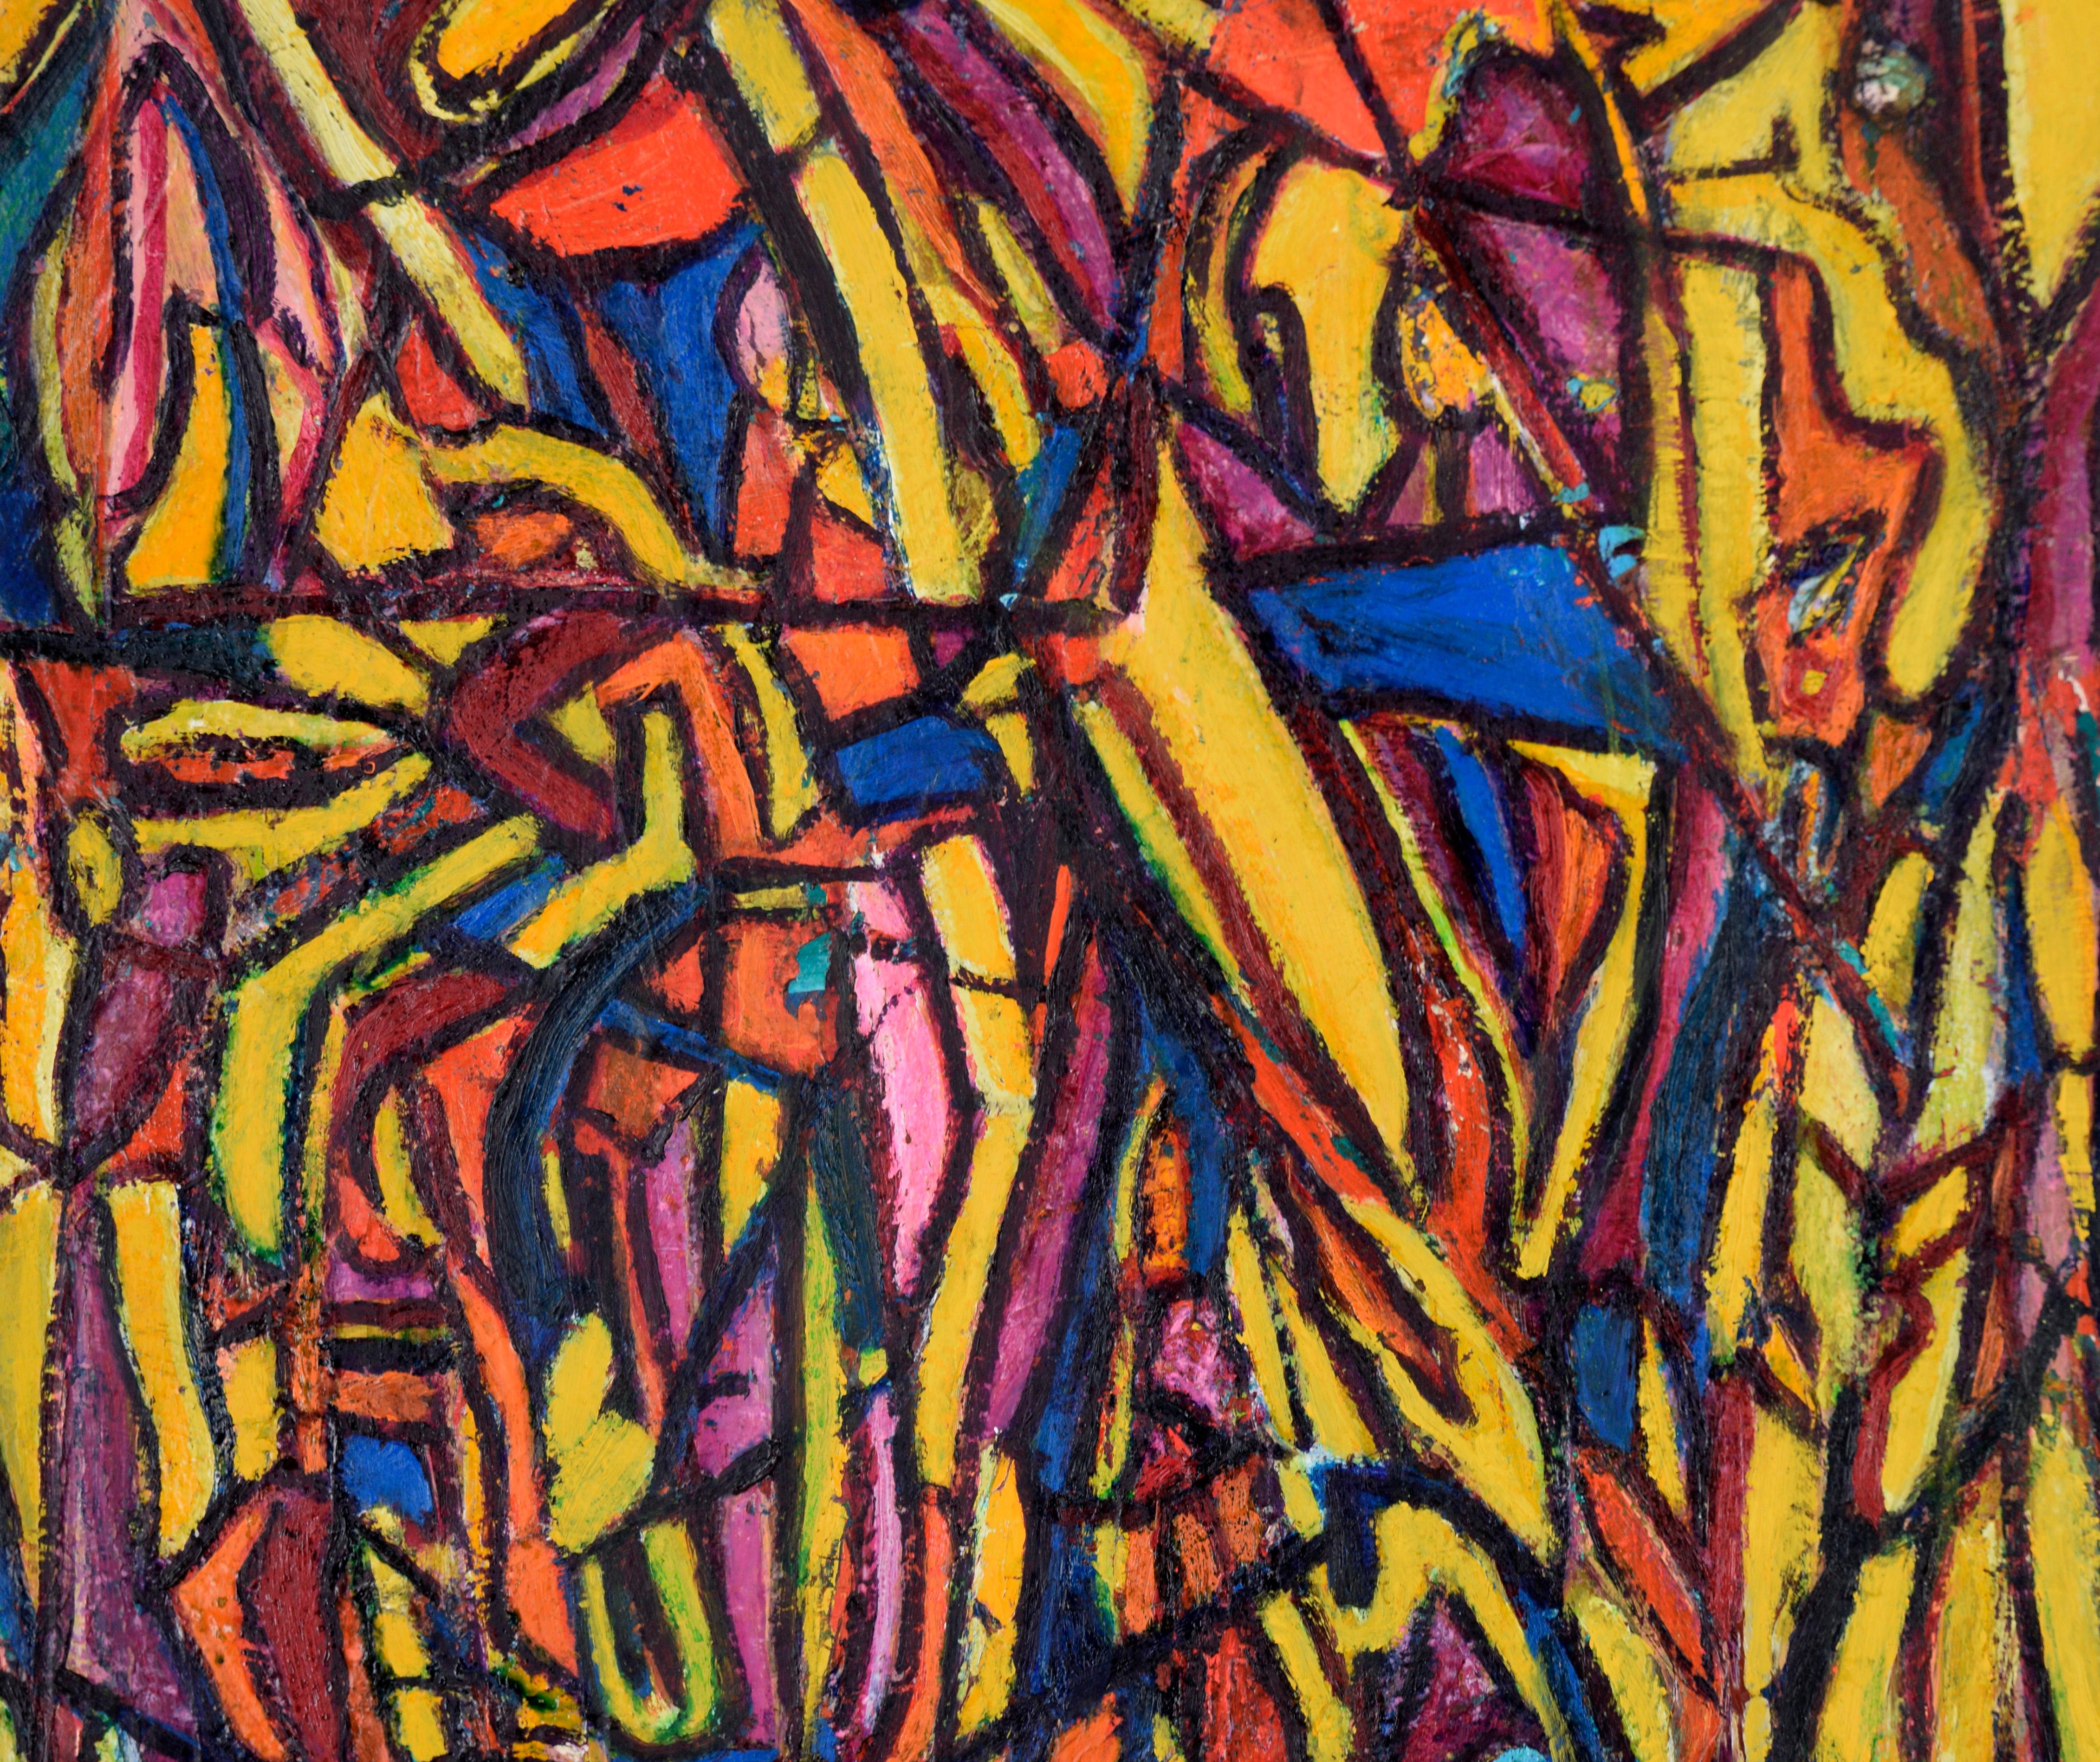 Psychedelic Abstract in Yellow, Blue, and Orange - Oil on Paper - Abstract Expressionist Painting by Jennie Rafton